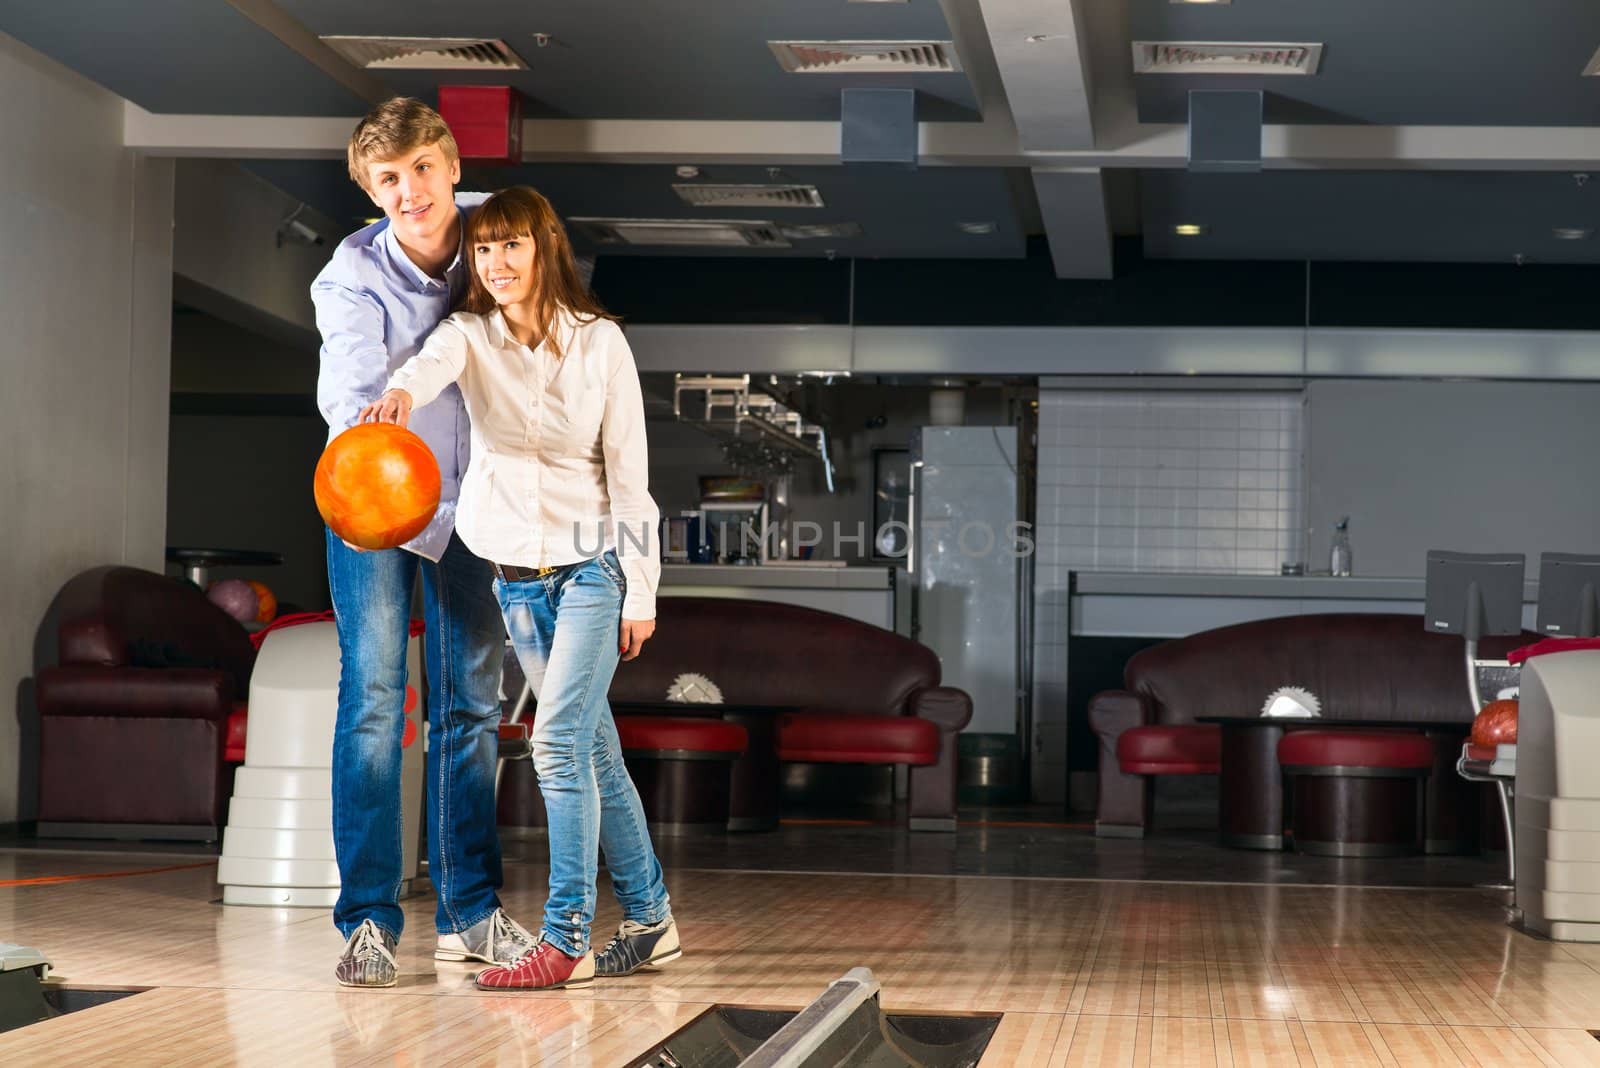 guy hugs her friendgirl, playing together in bowling